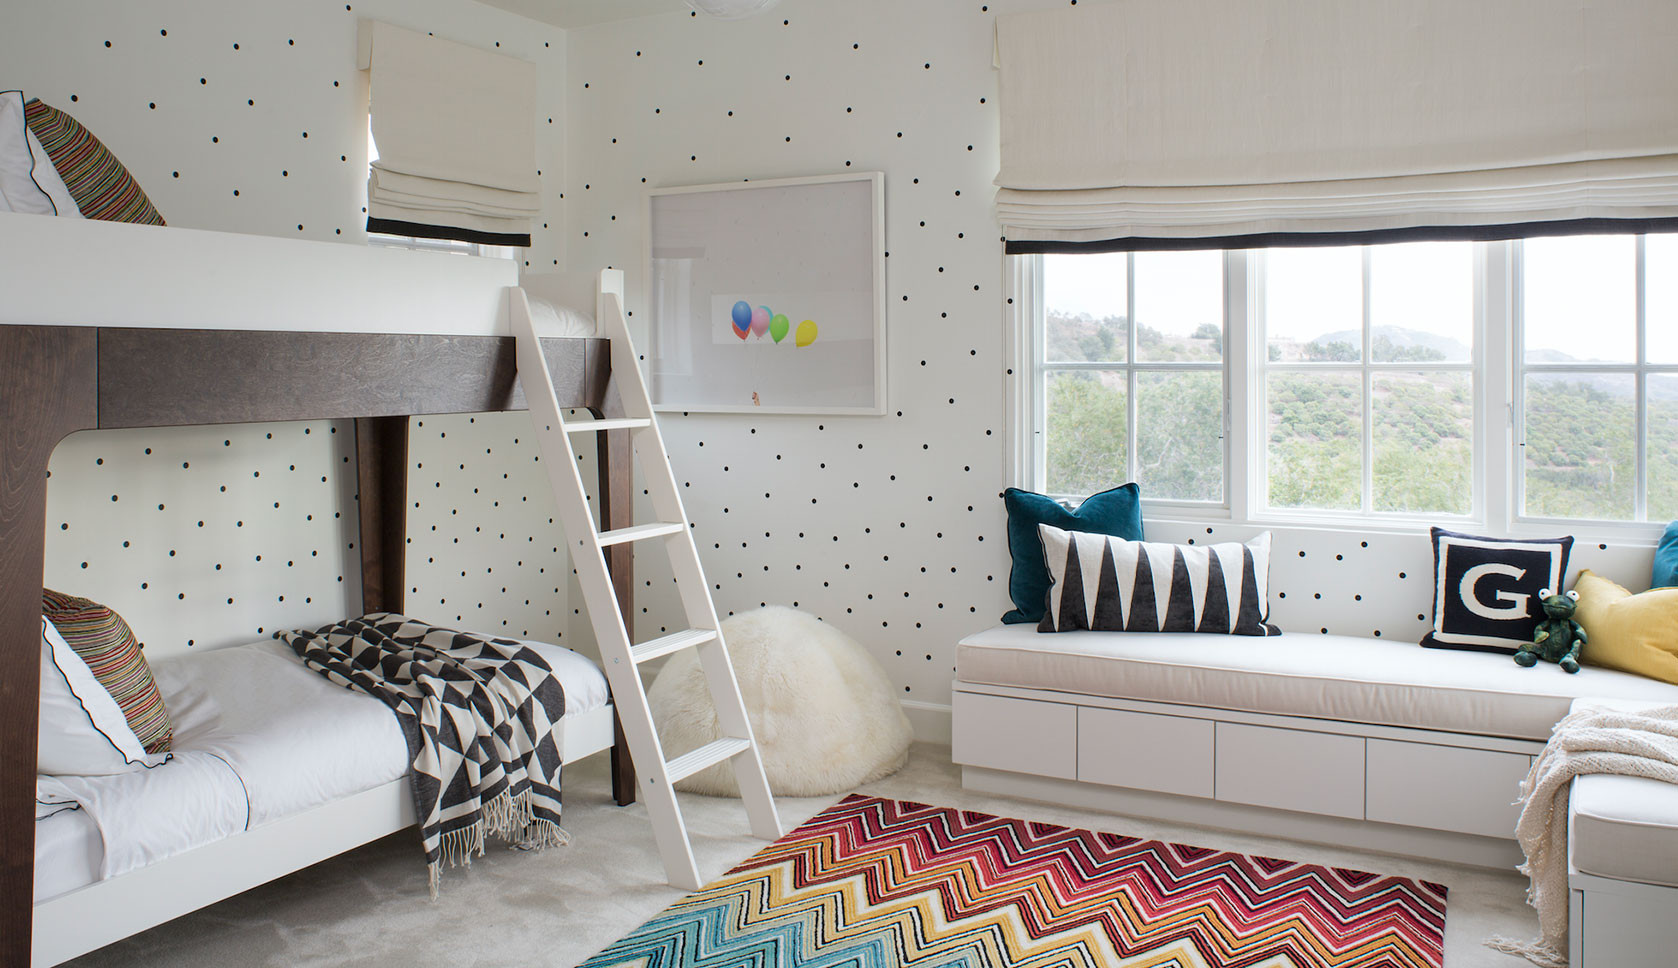 Kids Guest Room Ideas
 How to Great Guest Room Design